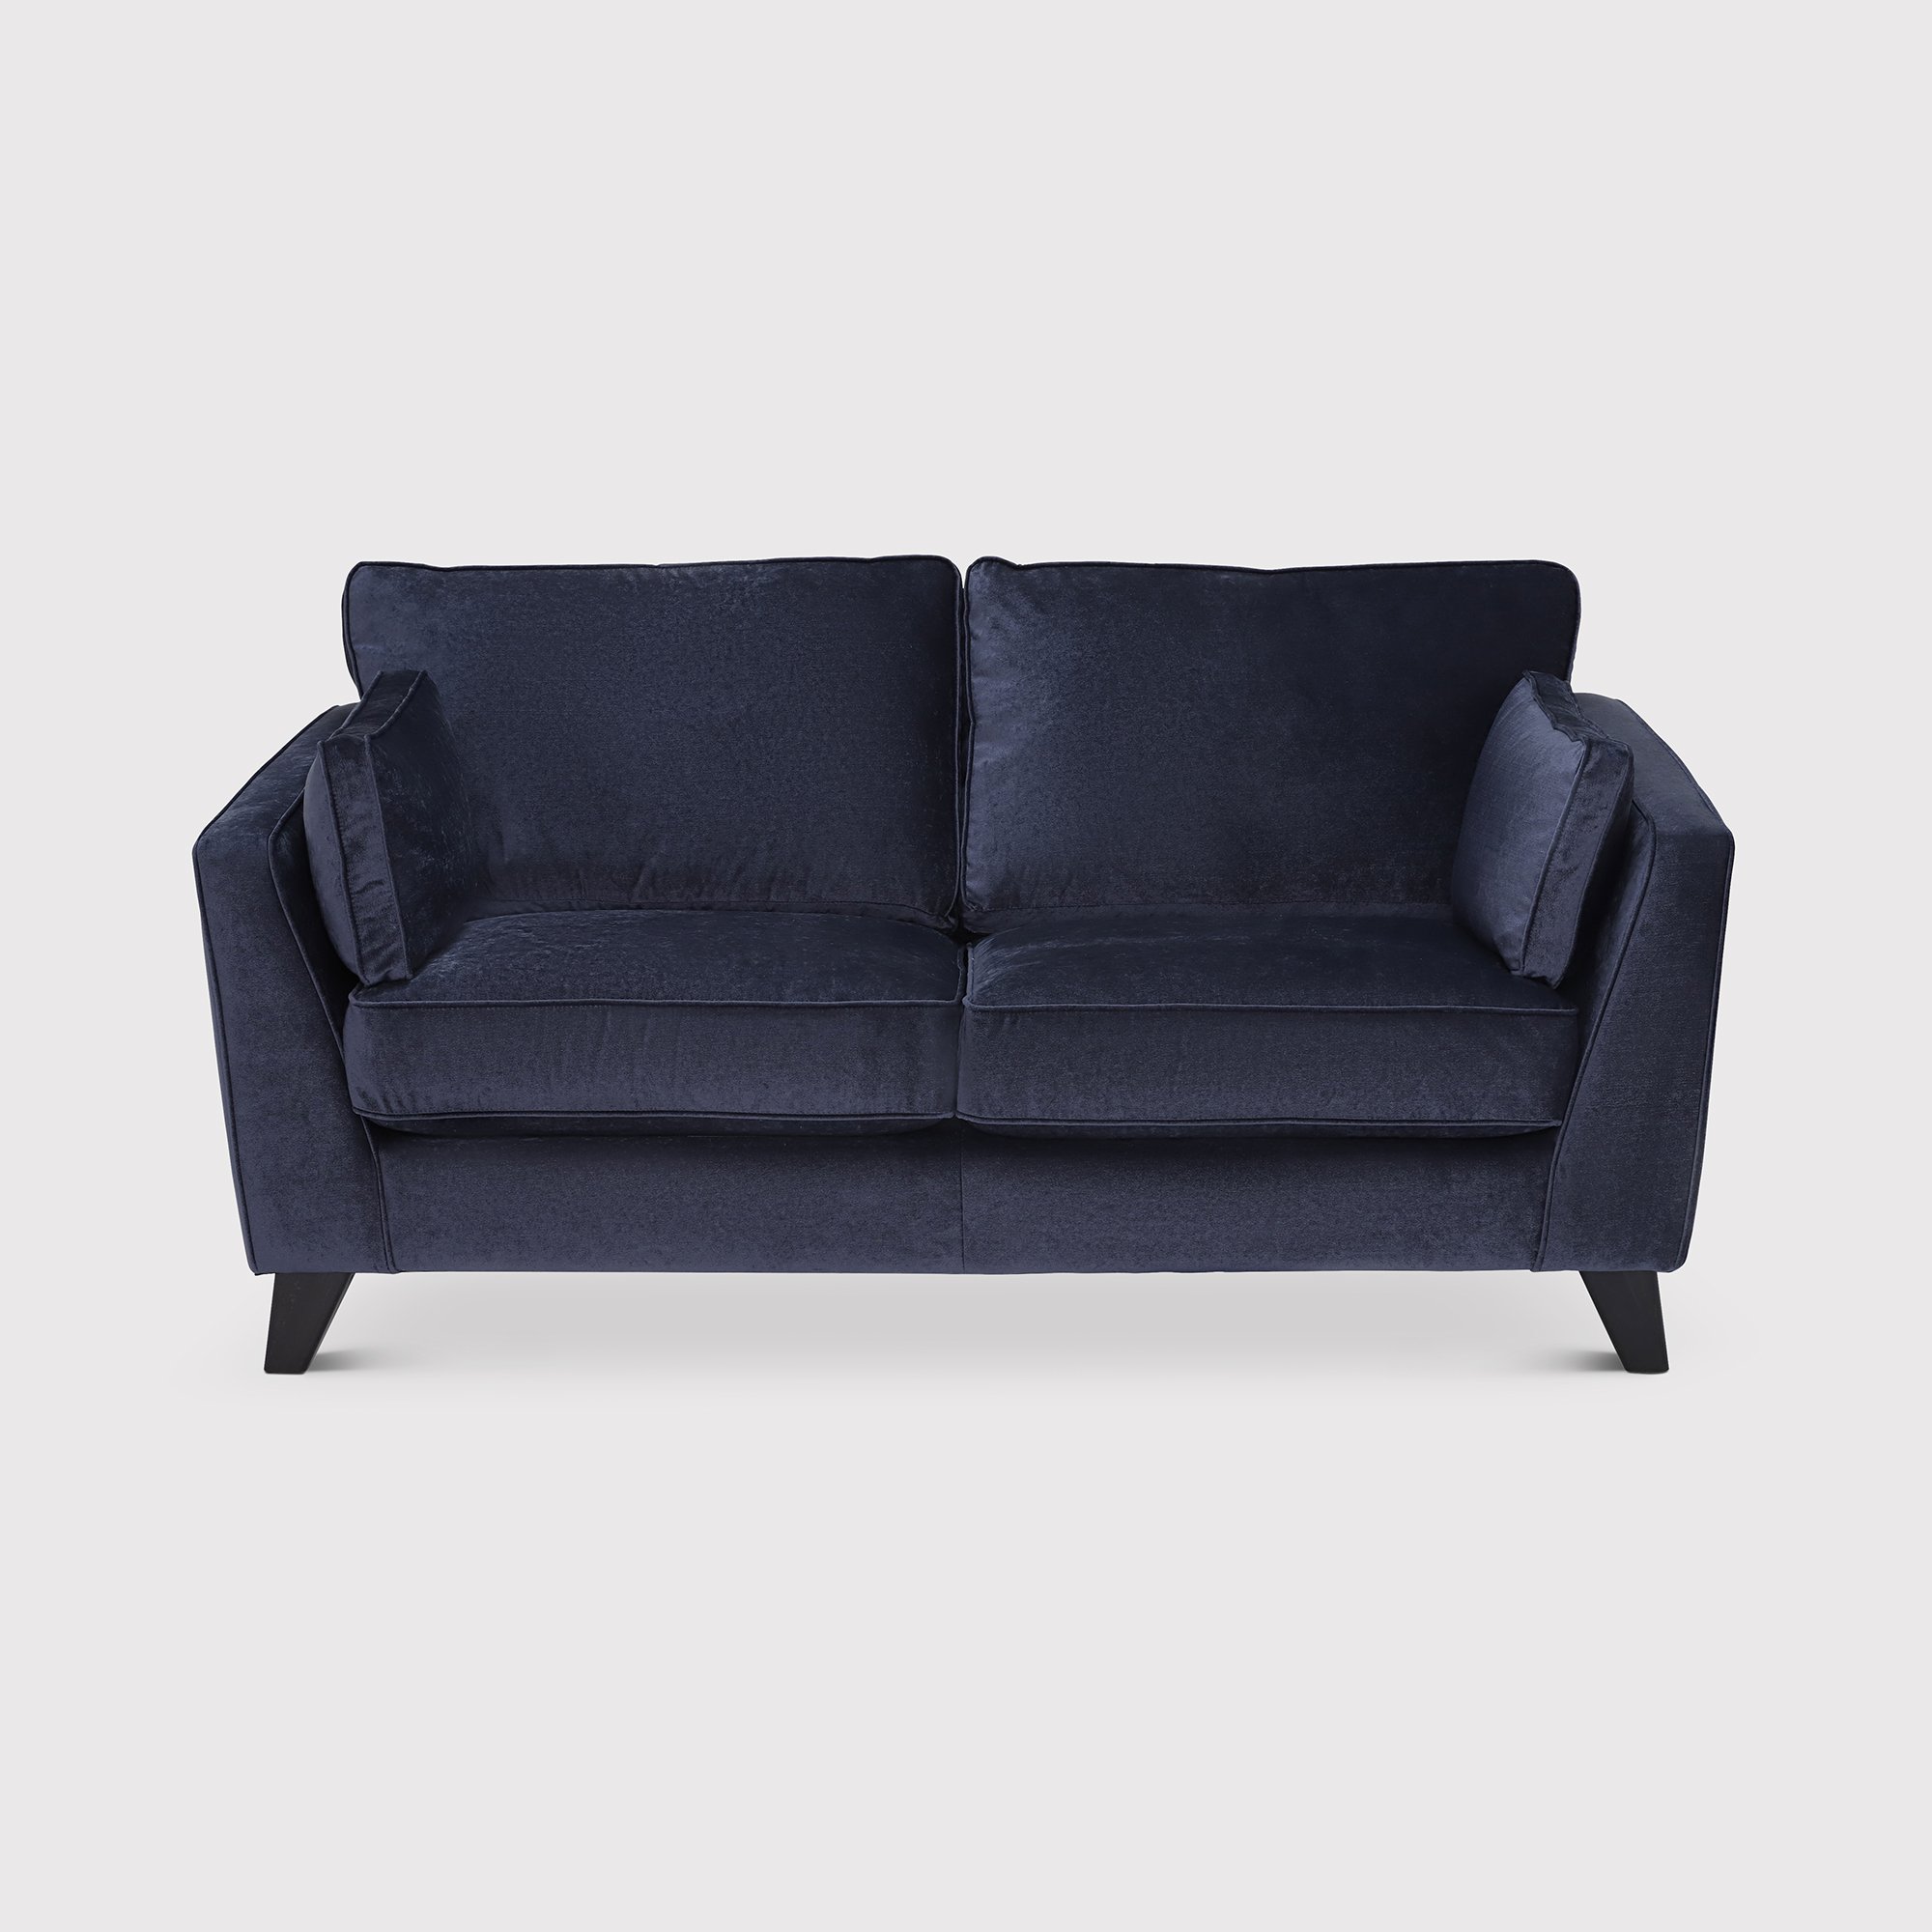 Rene 2 Seater Sofa Without Scatters, Blue Fabric | Barker & Stonehouse